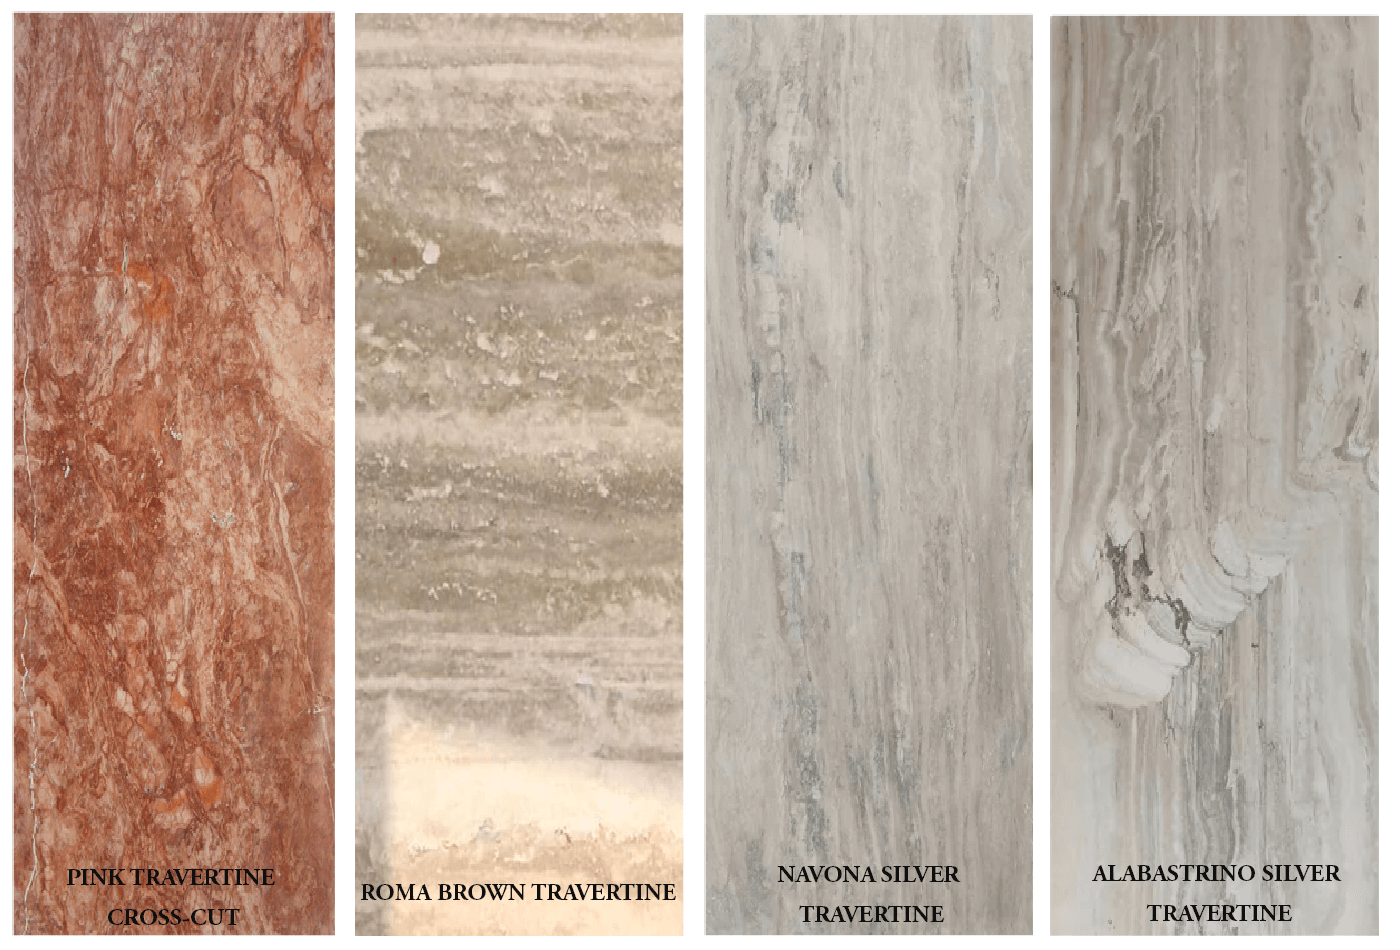 Vast Varieties of Travertine Stone Collections from us